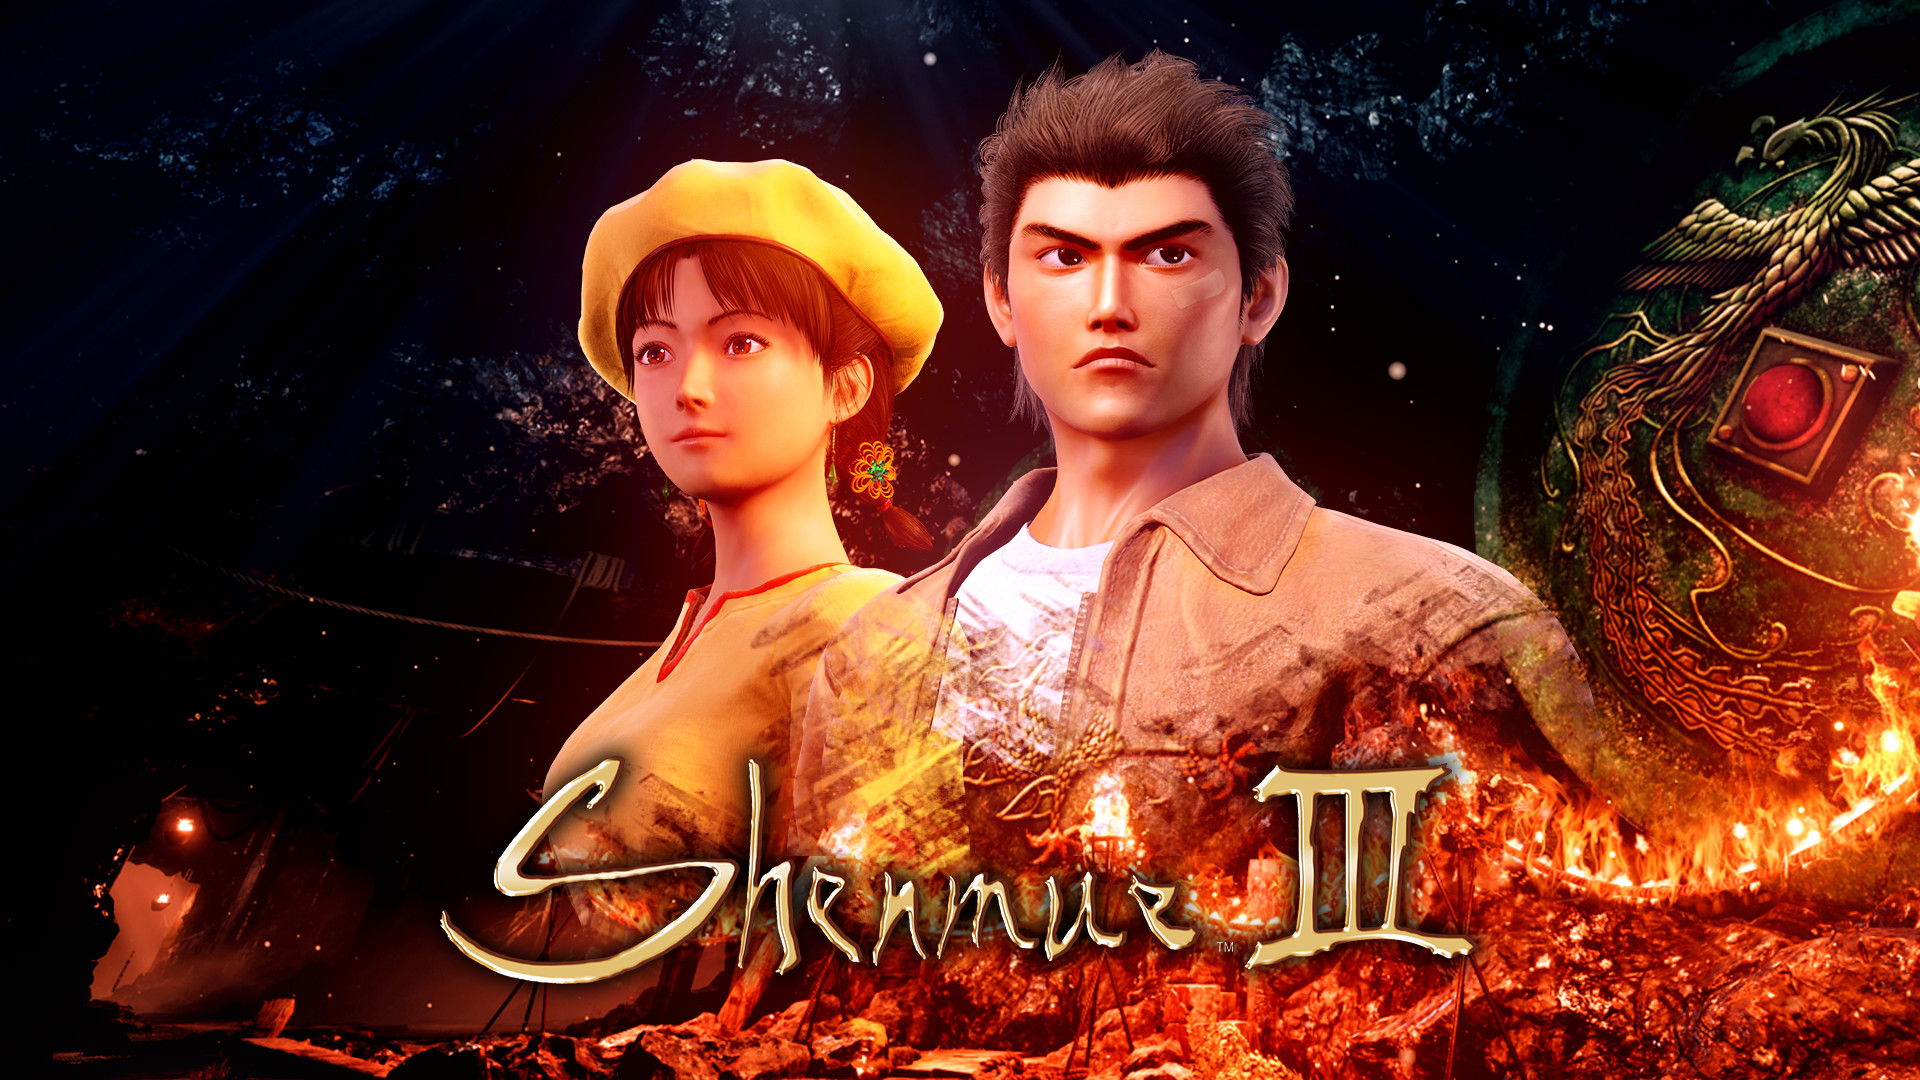 1920x1080 Shenmue Cinematic Wallpapers and More